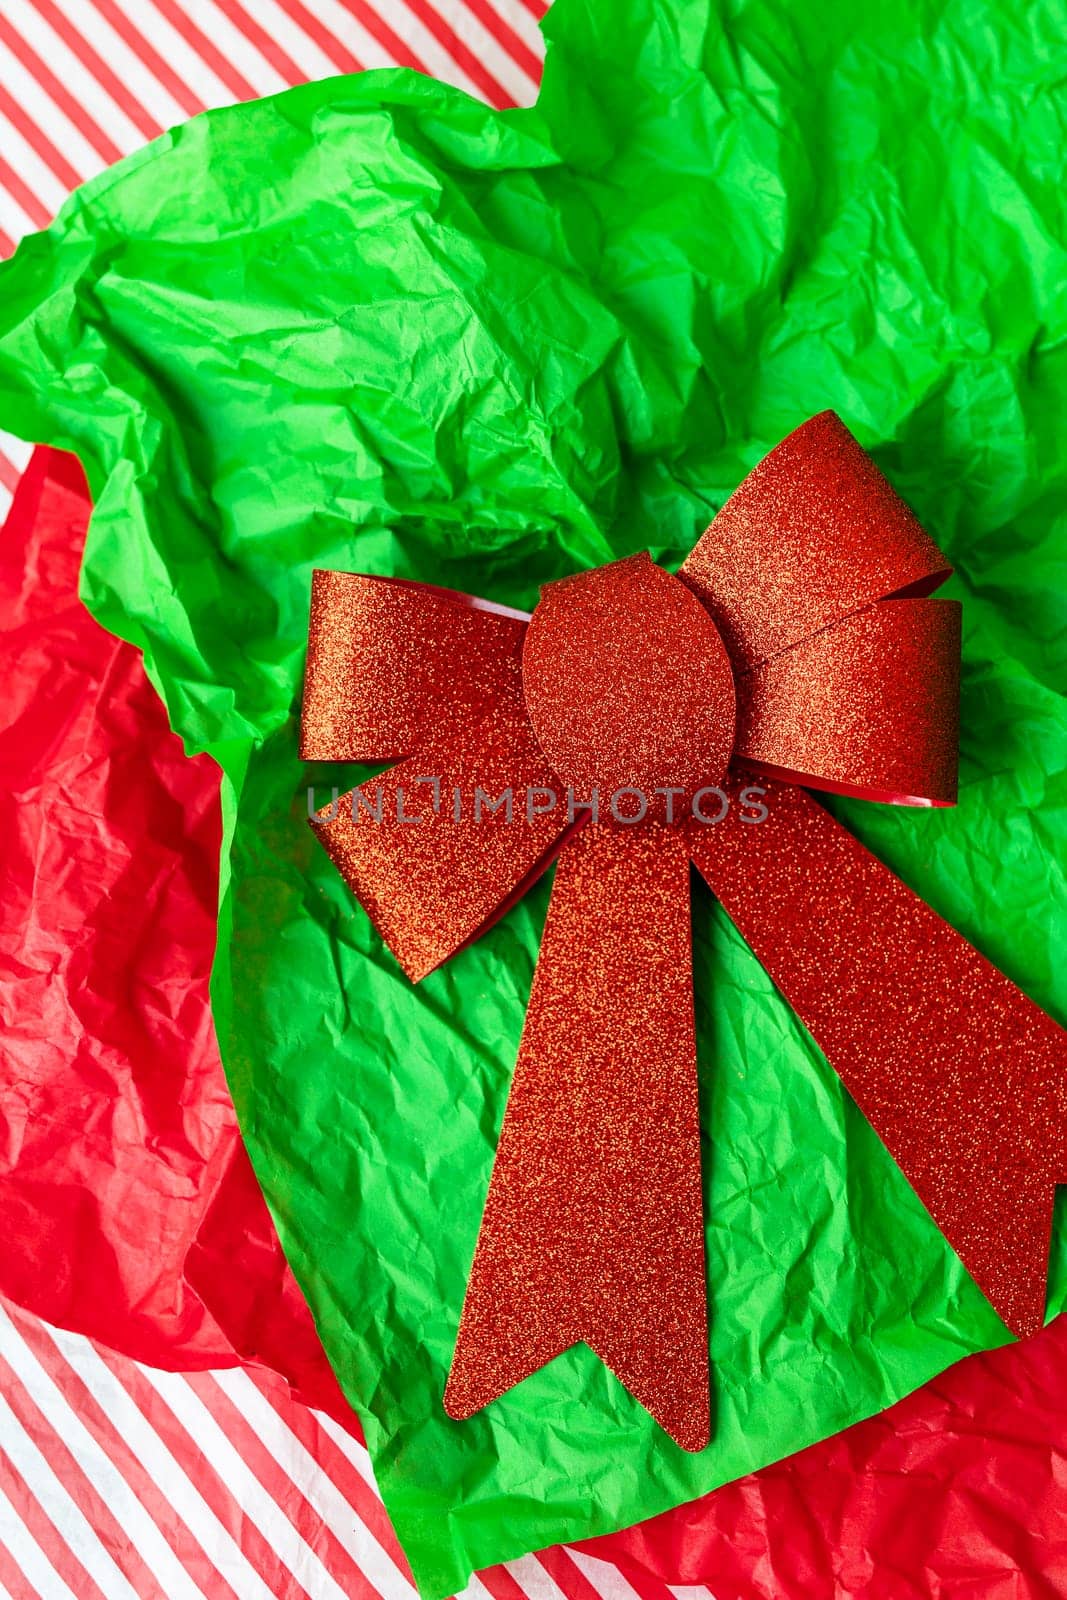 This is a photo of a red glitter bow on a green crumpled tissue paper with a red and white striped background. by sfinks